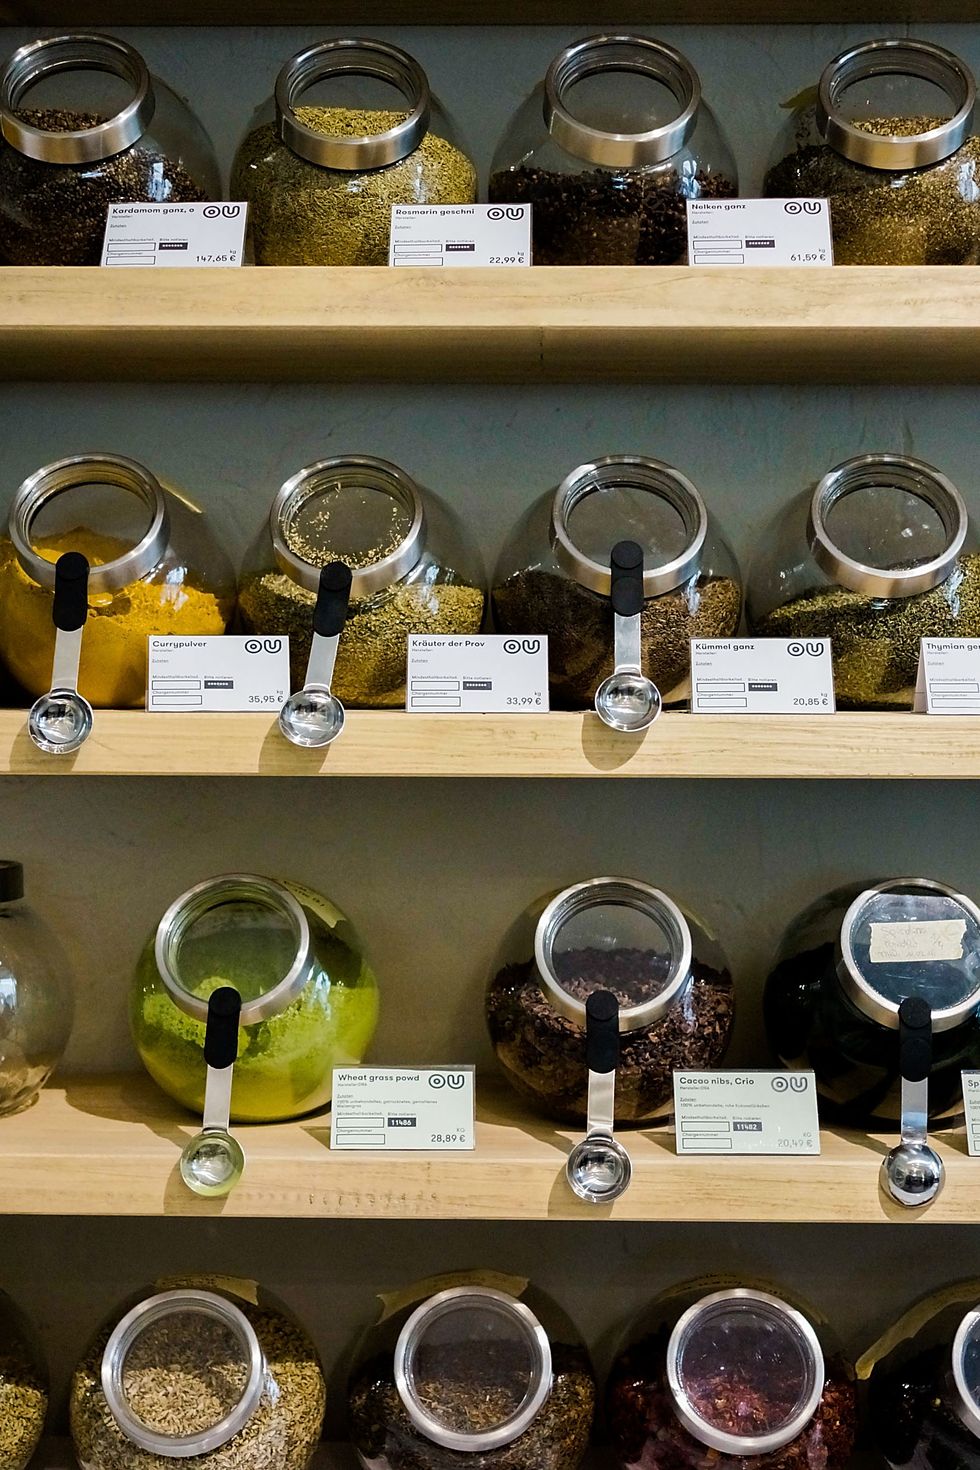 https://hips.hearstapps.com/hmg-prod/images/several-kinds-of-spices-a-offerd-in-glass-vessels-at-the-news-photo-1643386683.jpg?crop=0.44457xw:1xh;center,top&resize=980:*